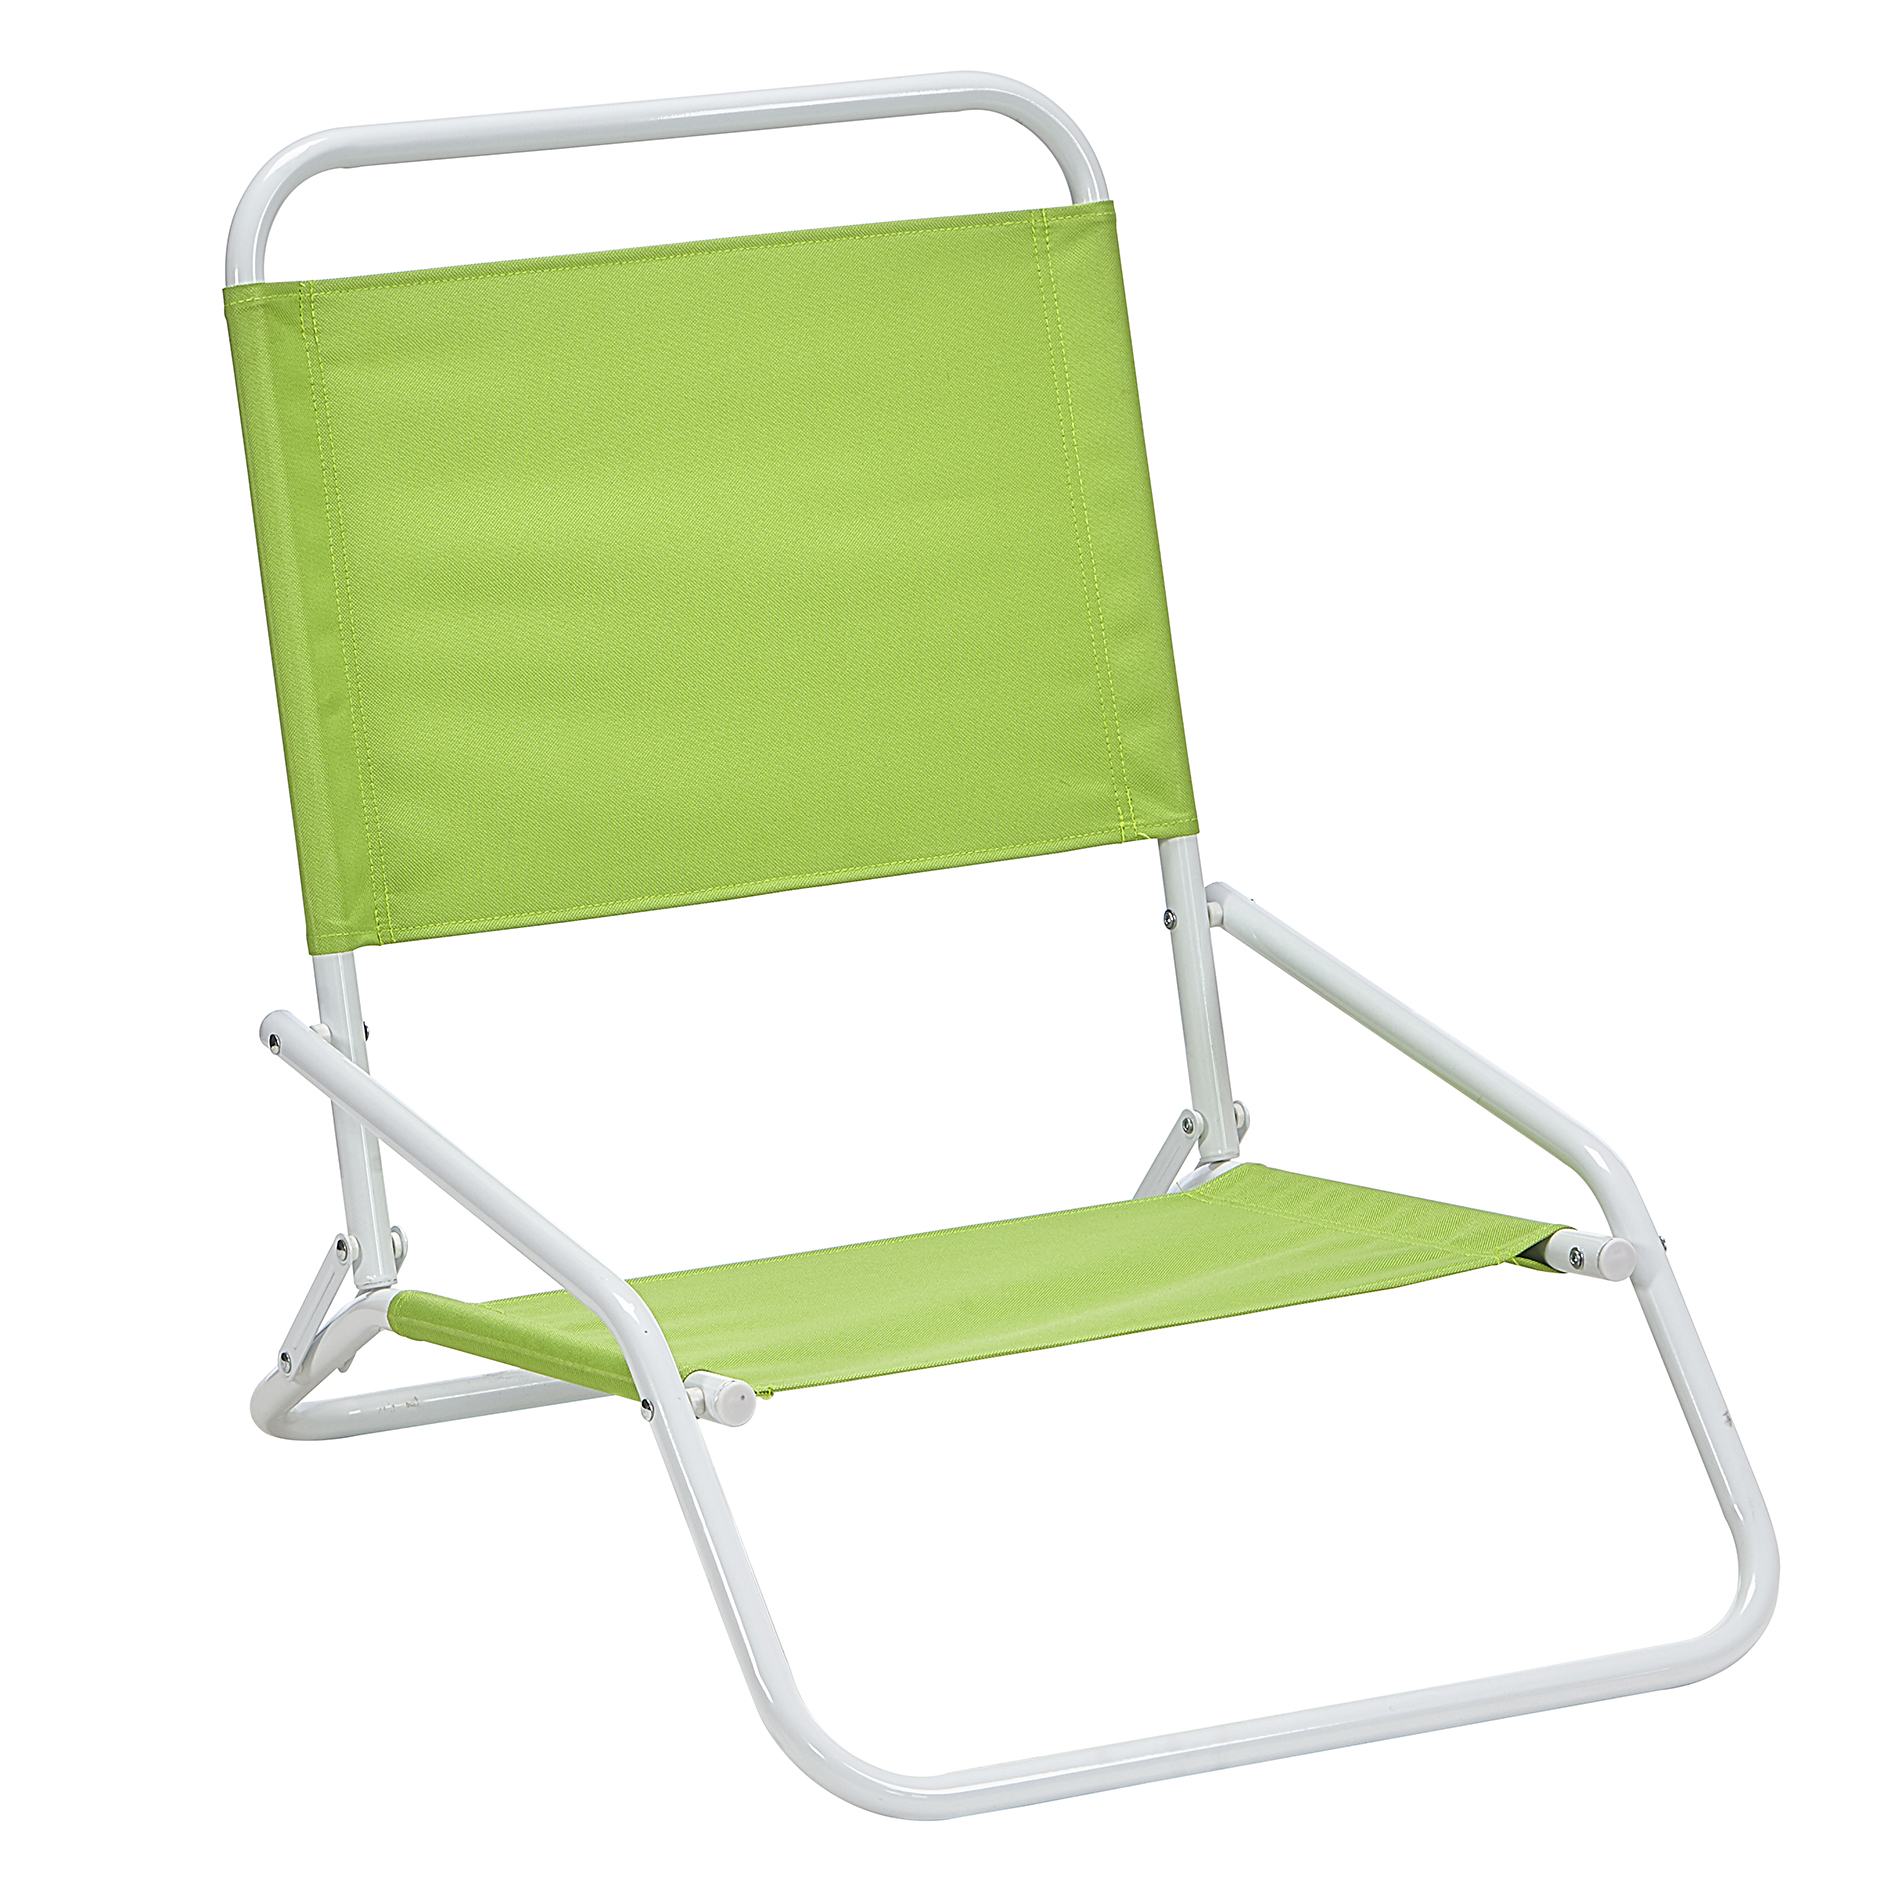 New Low Beach Chairs Kmart for Small Space